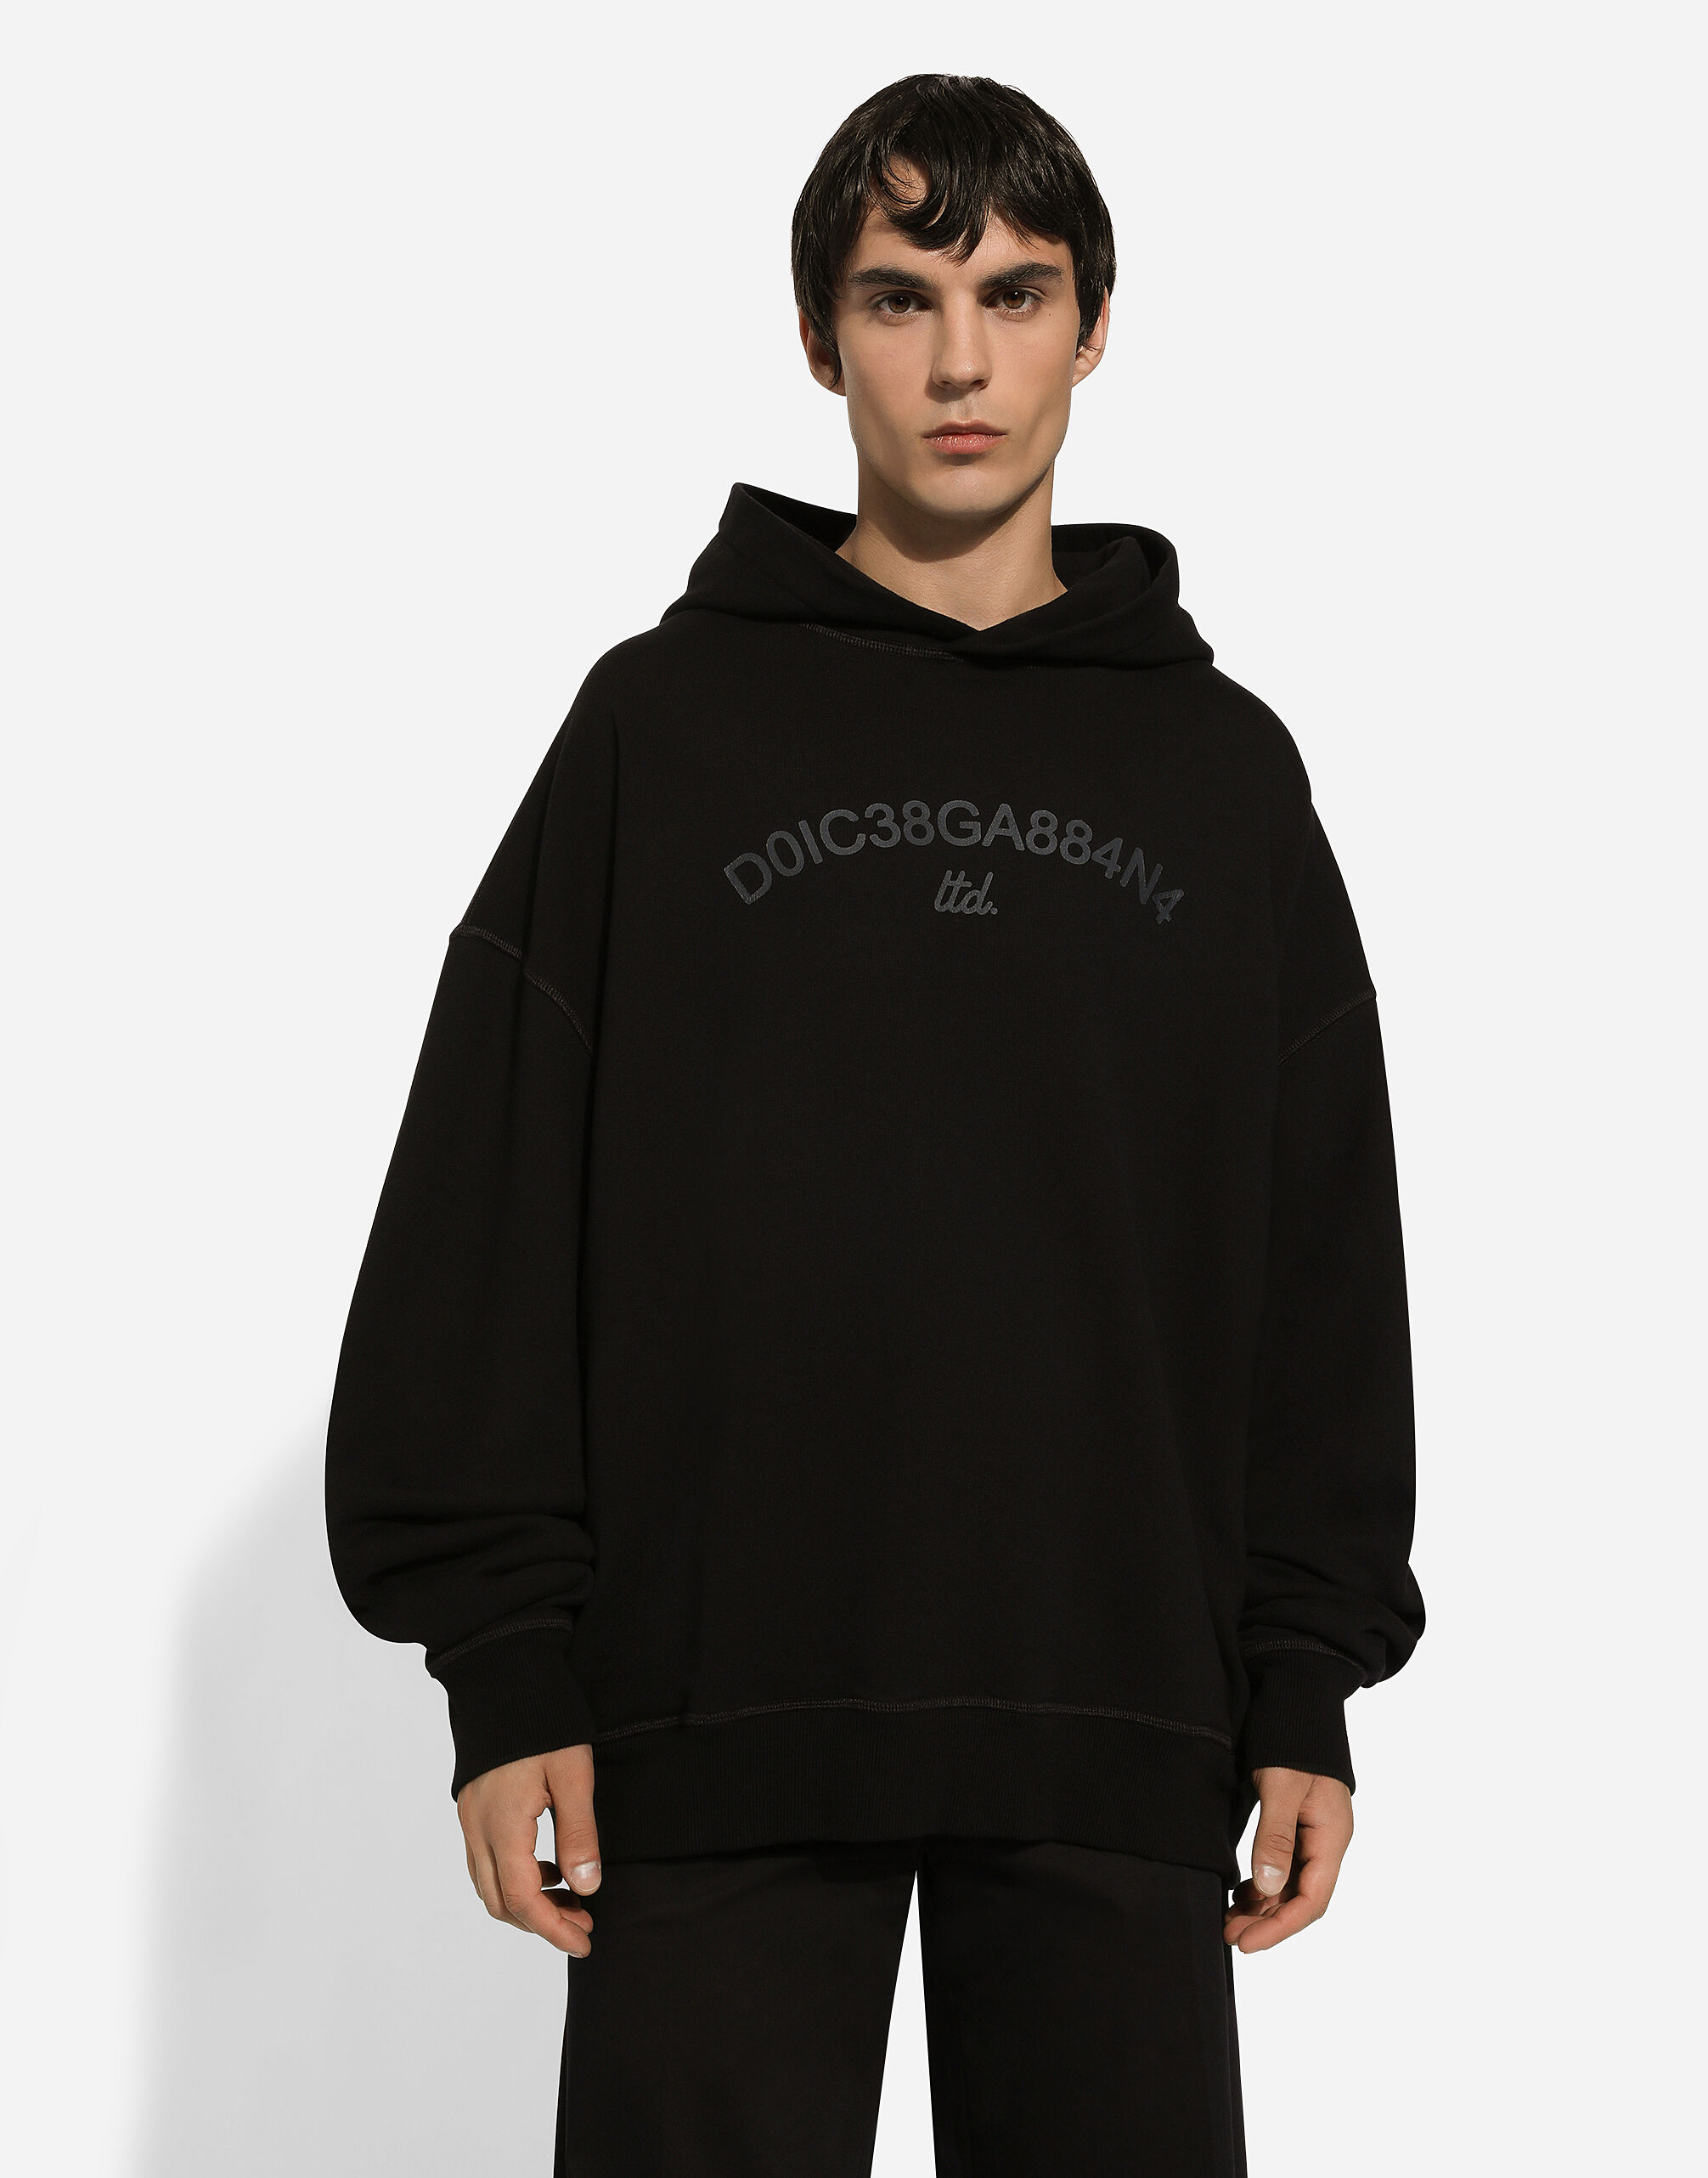 Hoodie with Dolce&Gabbana logo print in Black for | Dolce&Gabbana® US